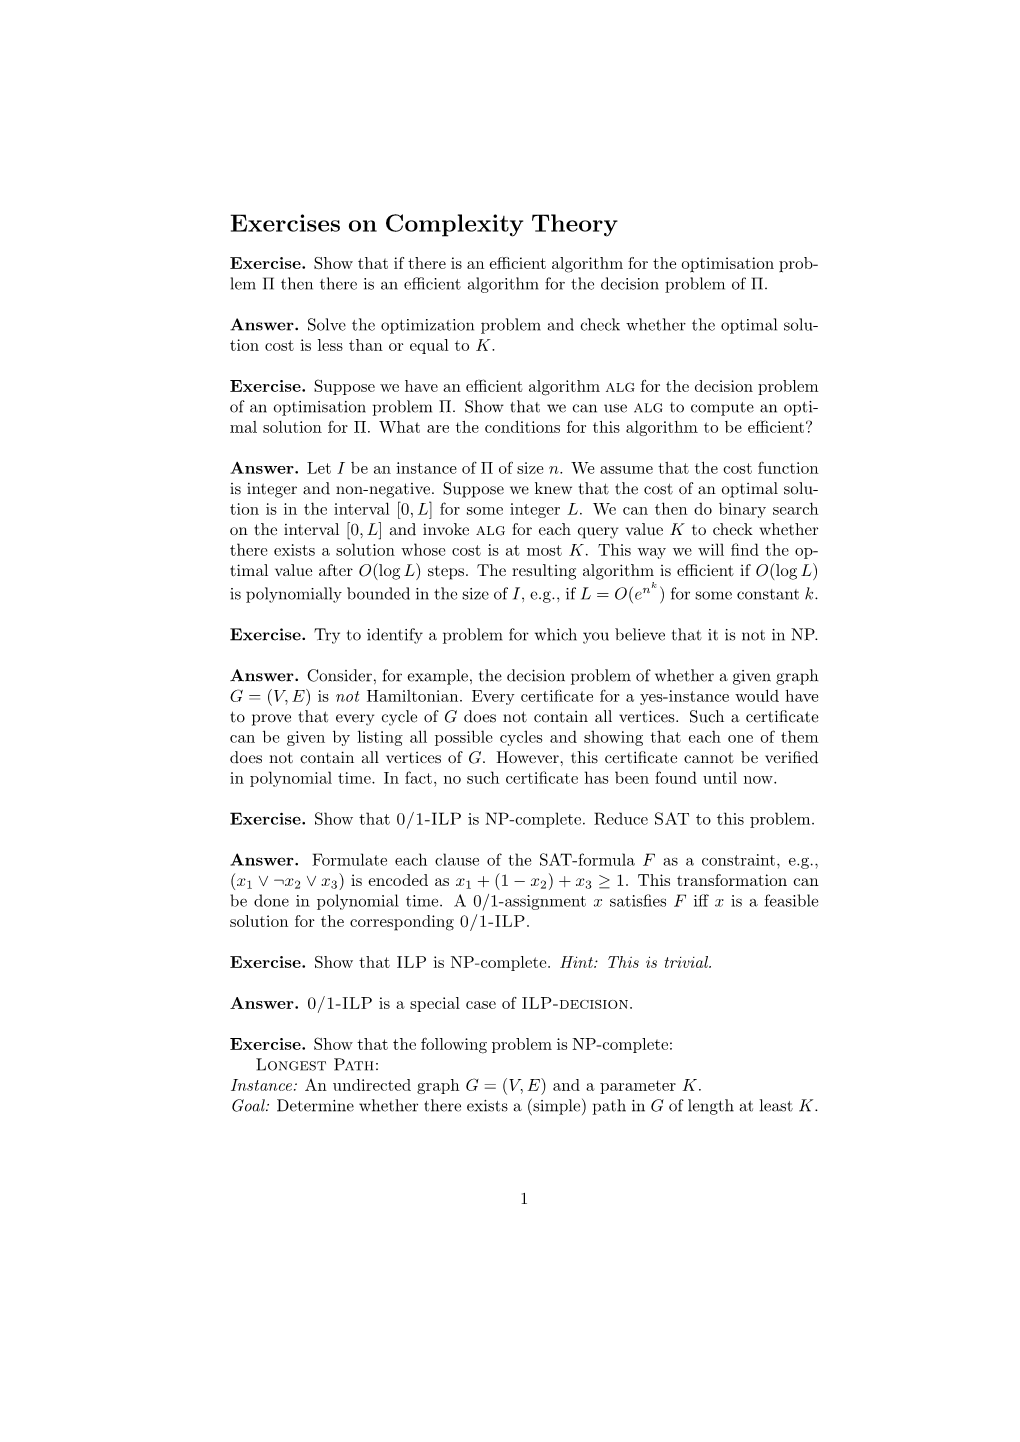 Exercises on Complexity Theory